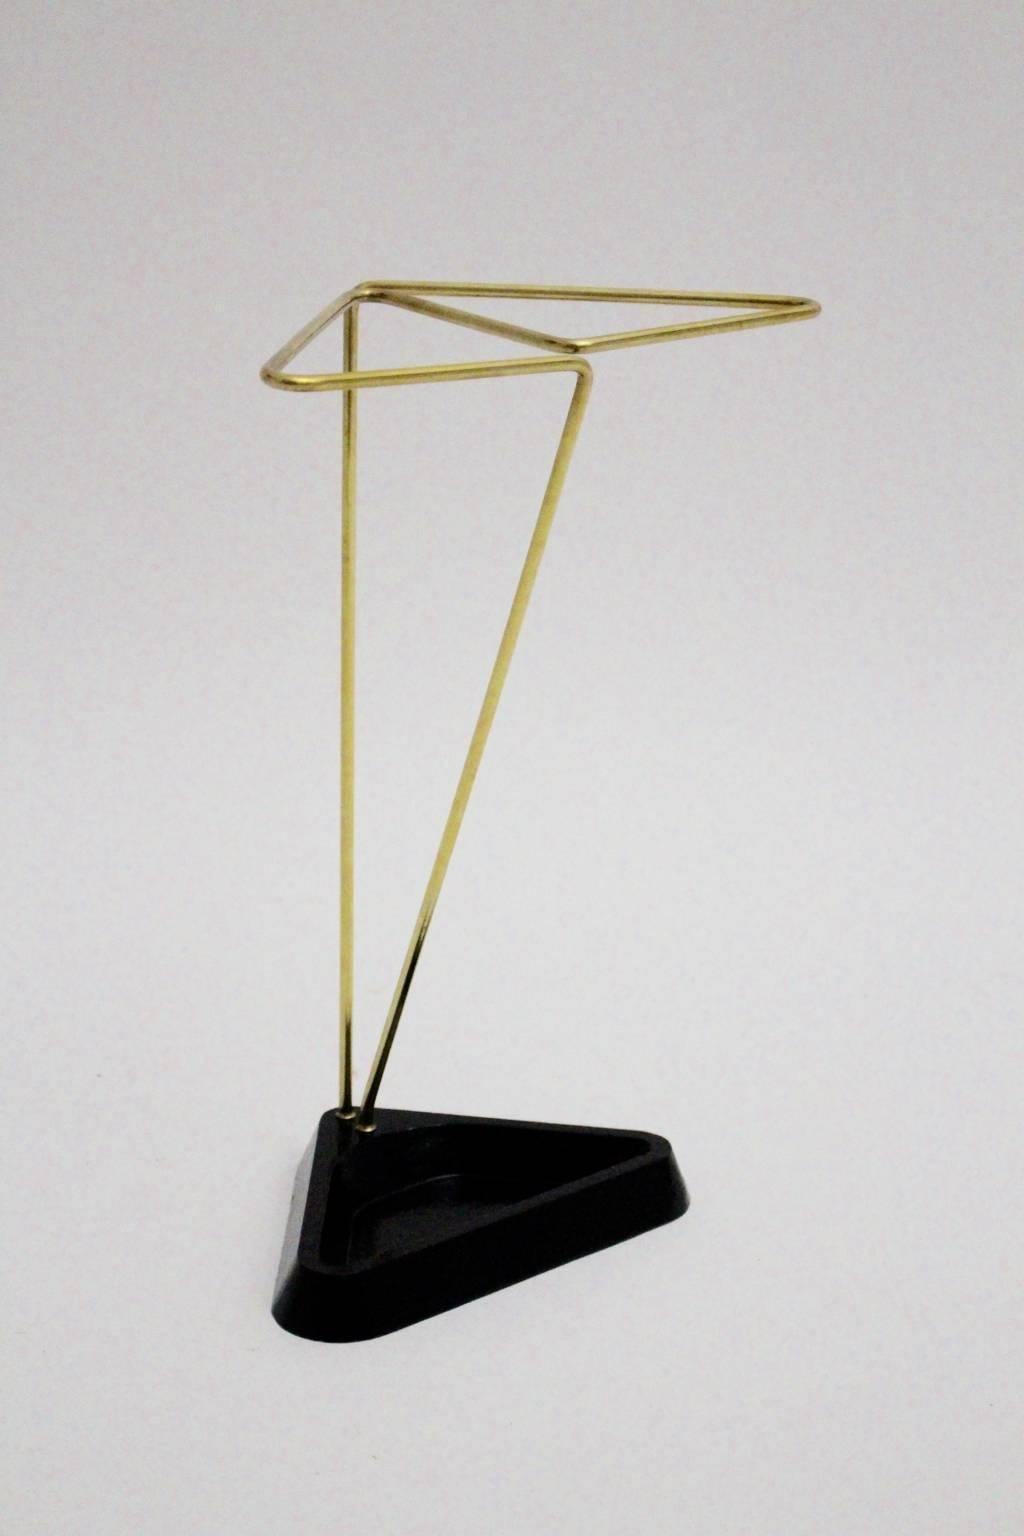 Mid century Modern vintage umbrella stand from black cast iron and brass details in triangle like shape.
The vintage condition is very good.

approx. measures:
Width 26.5 cm
Depth 16 cm
Height 40 cm.